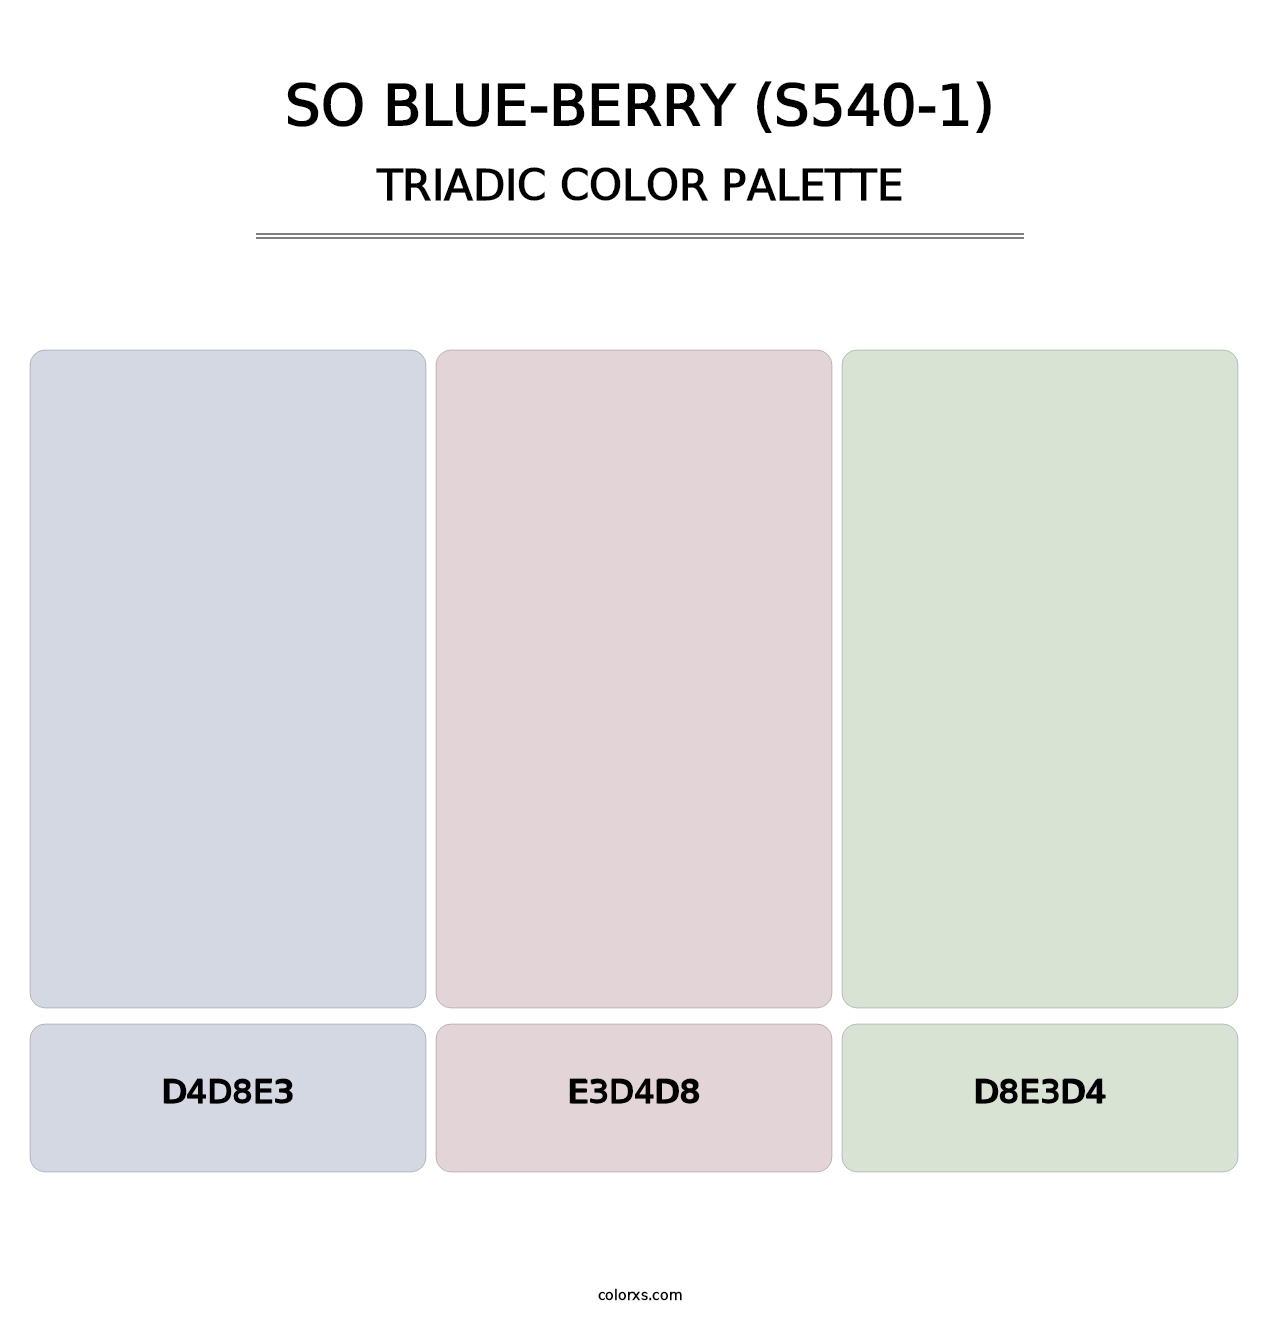 So Blue-Berry (S540-1) - Triadic Color Palette